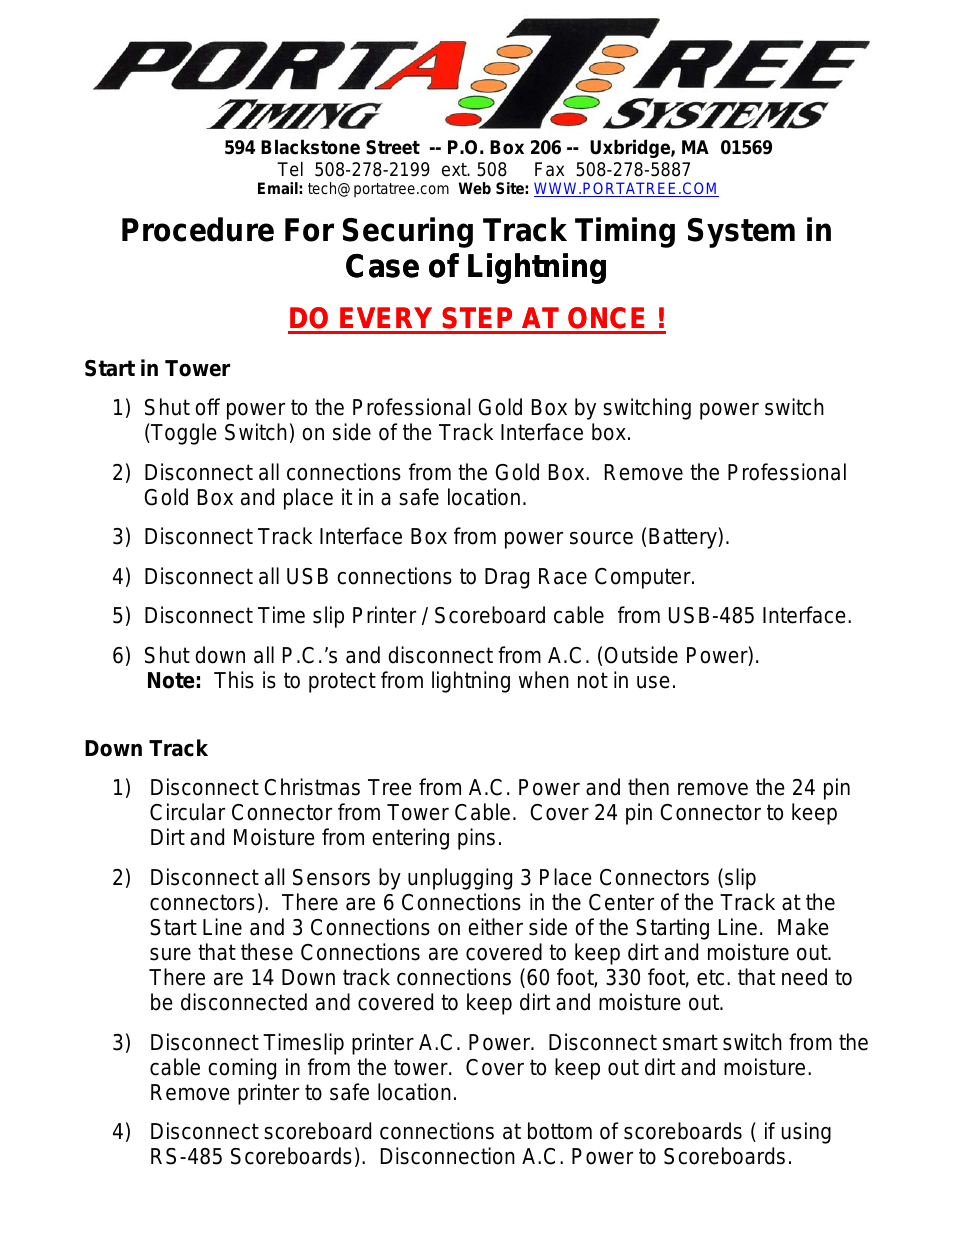 Securing Track Timing System in Case of Lightening